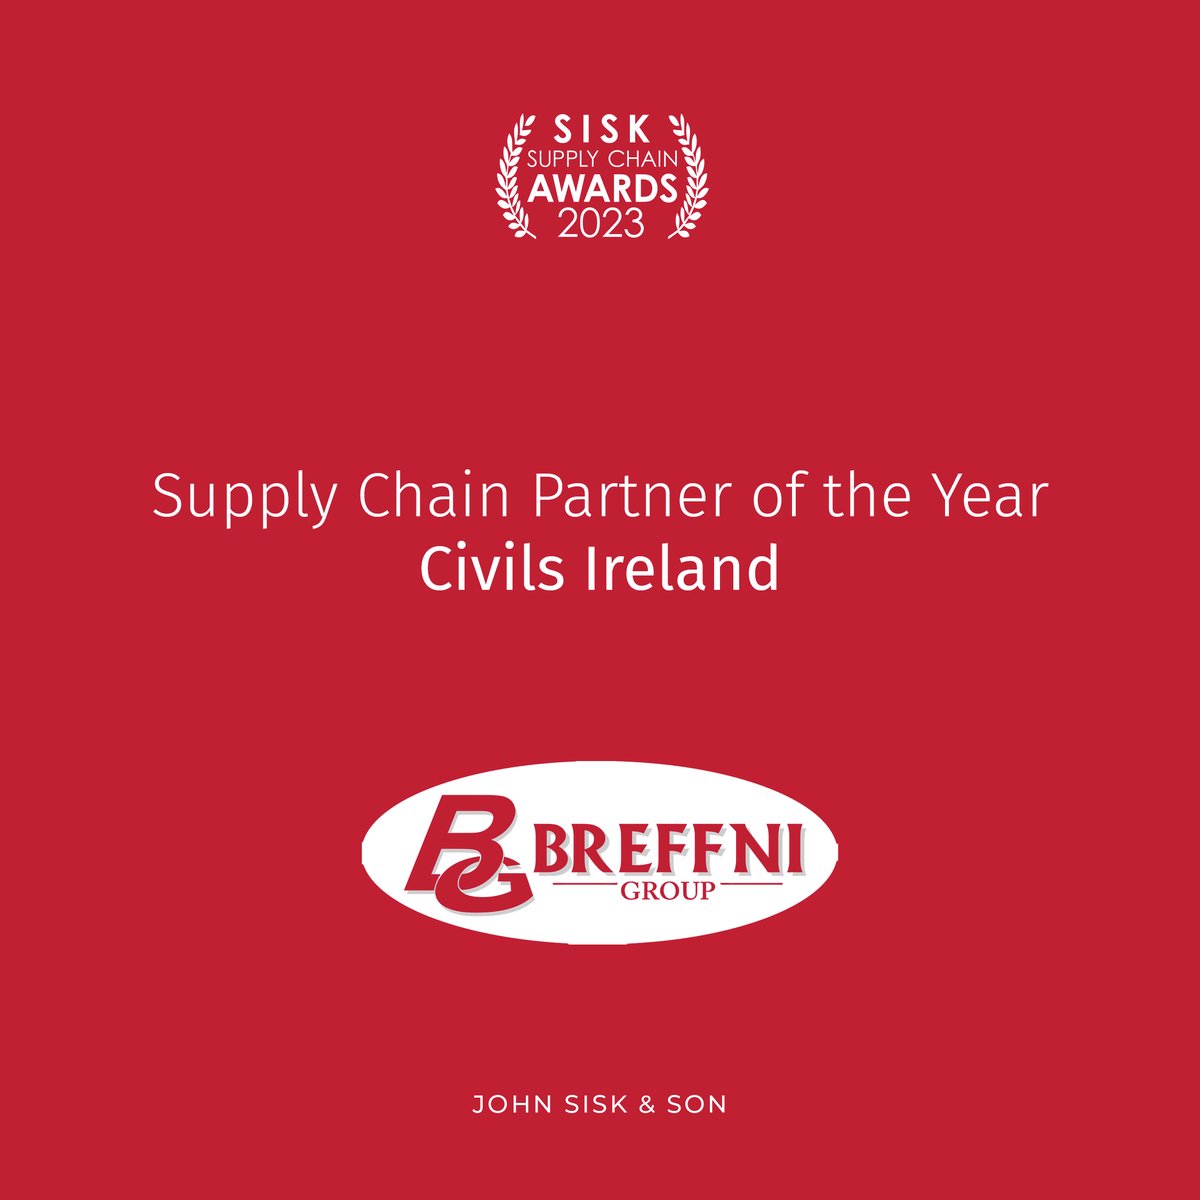 Breffni Group are our next winners of the evening in the ‘Supply Chain Partner of the Year – Civils Ireland’ category. Big congrats to all the Breffni Group team! #BuiltBySisk